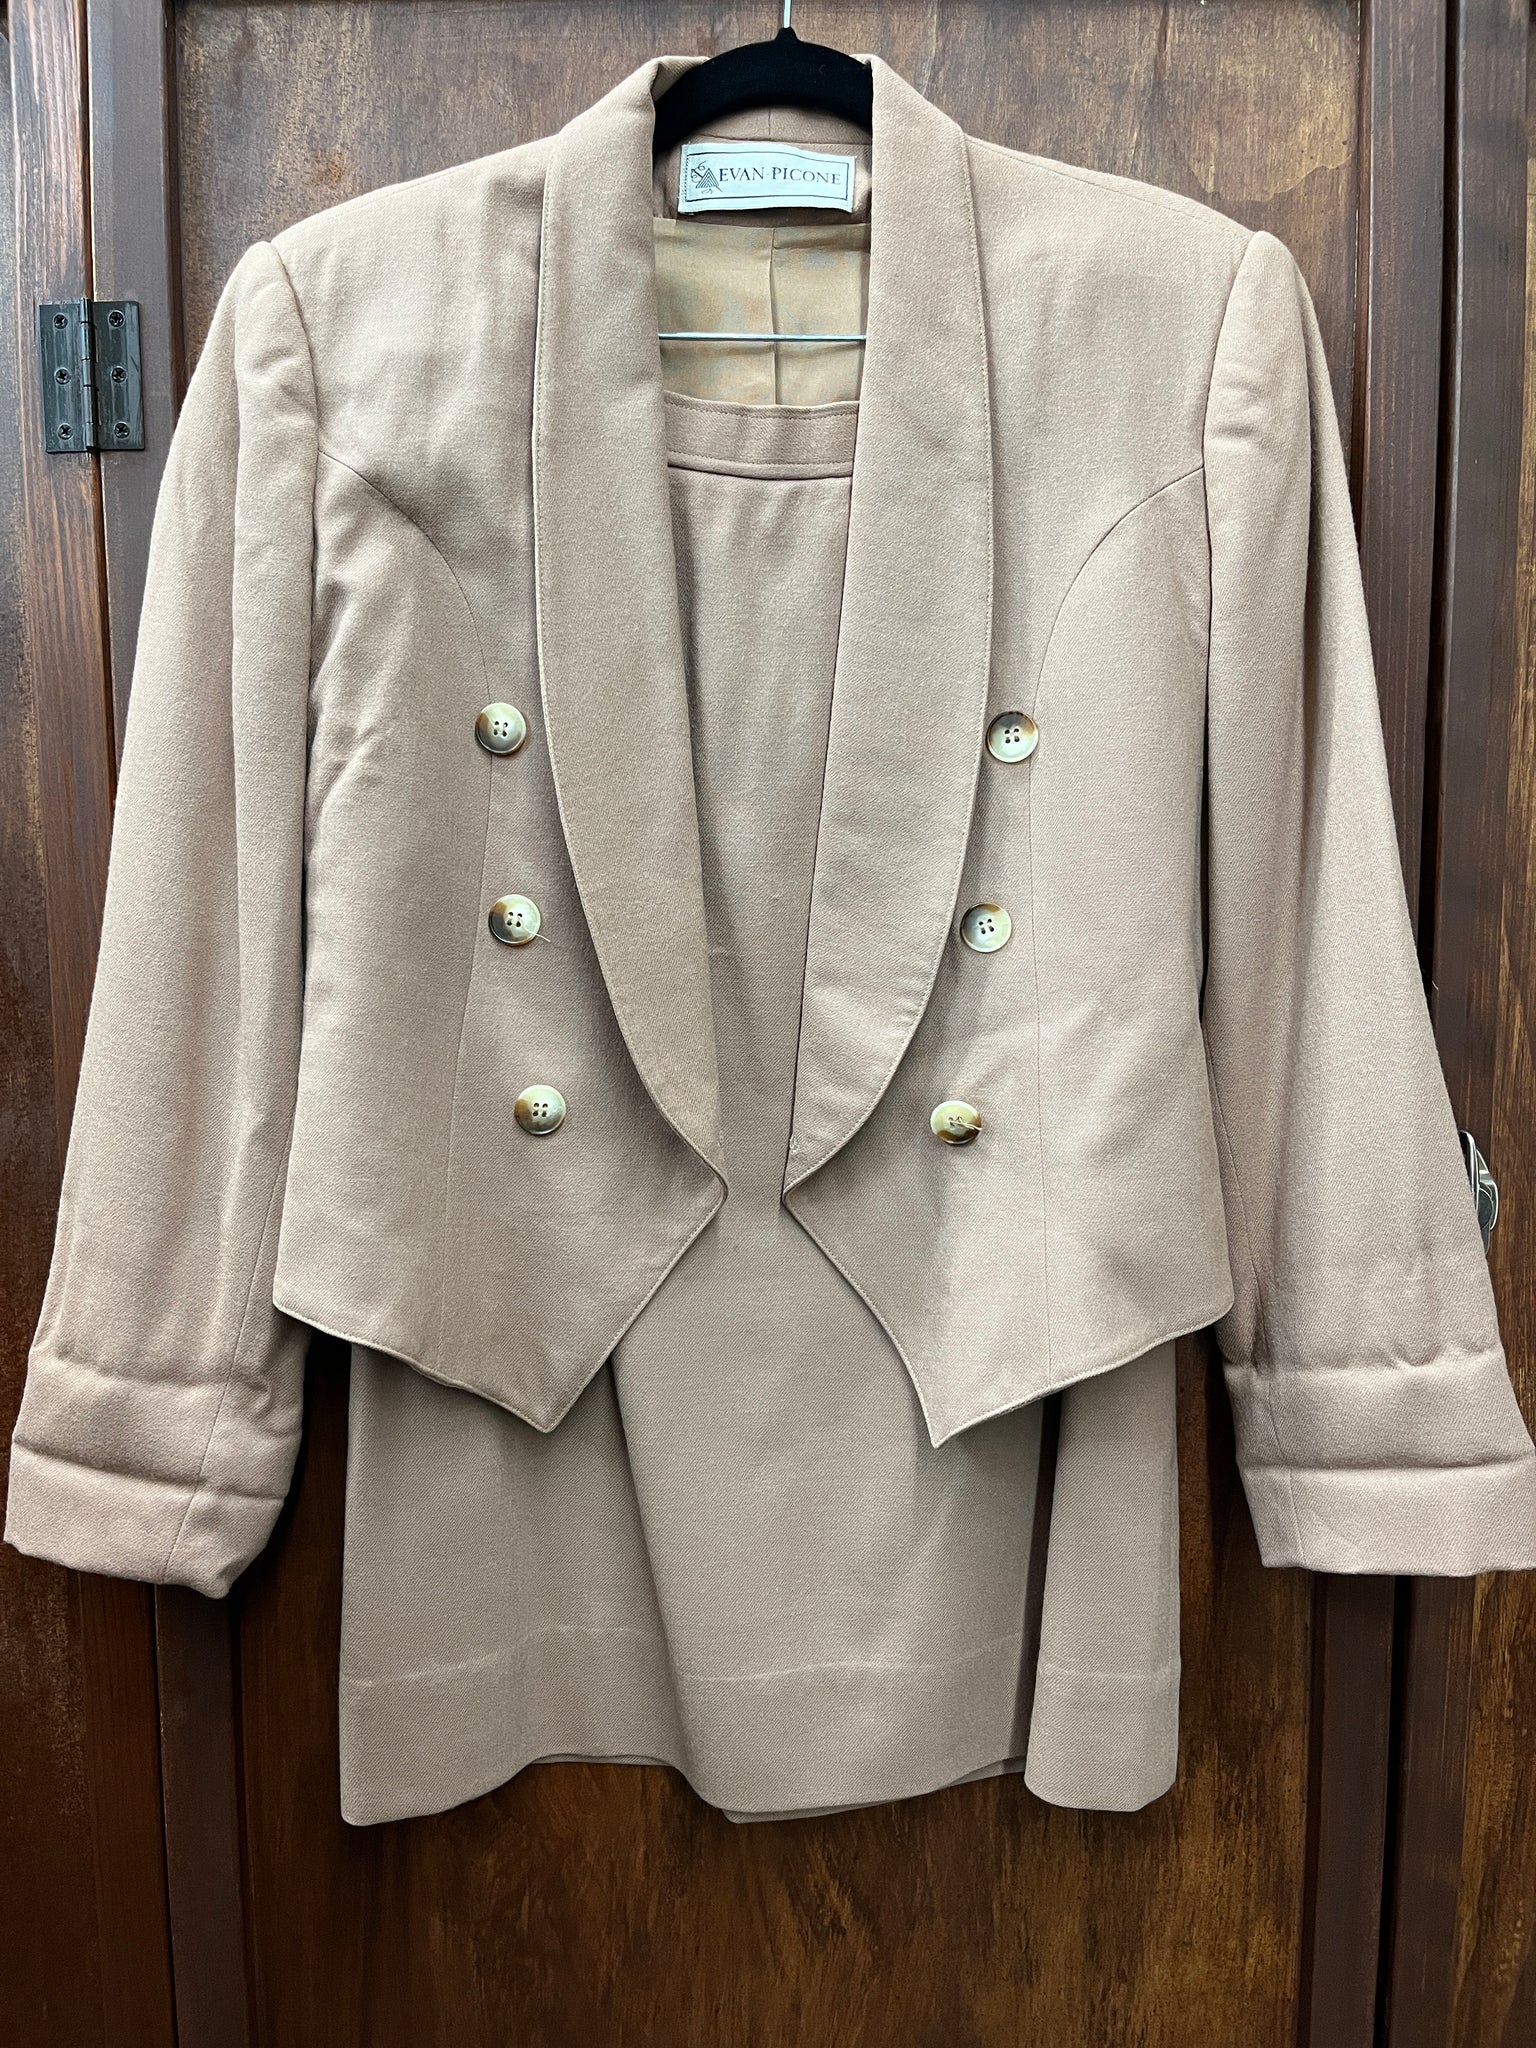 1990s 2 PIECE- Evan Picone-tan jacket with skirt